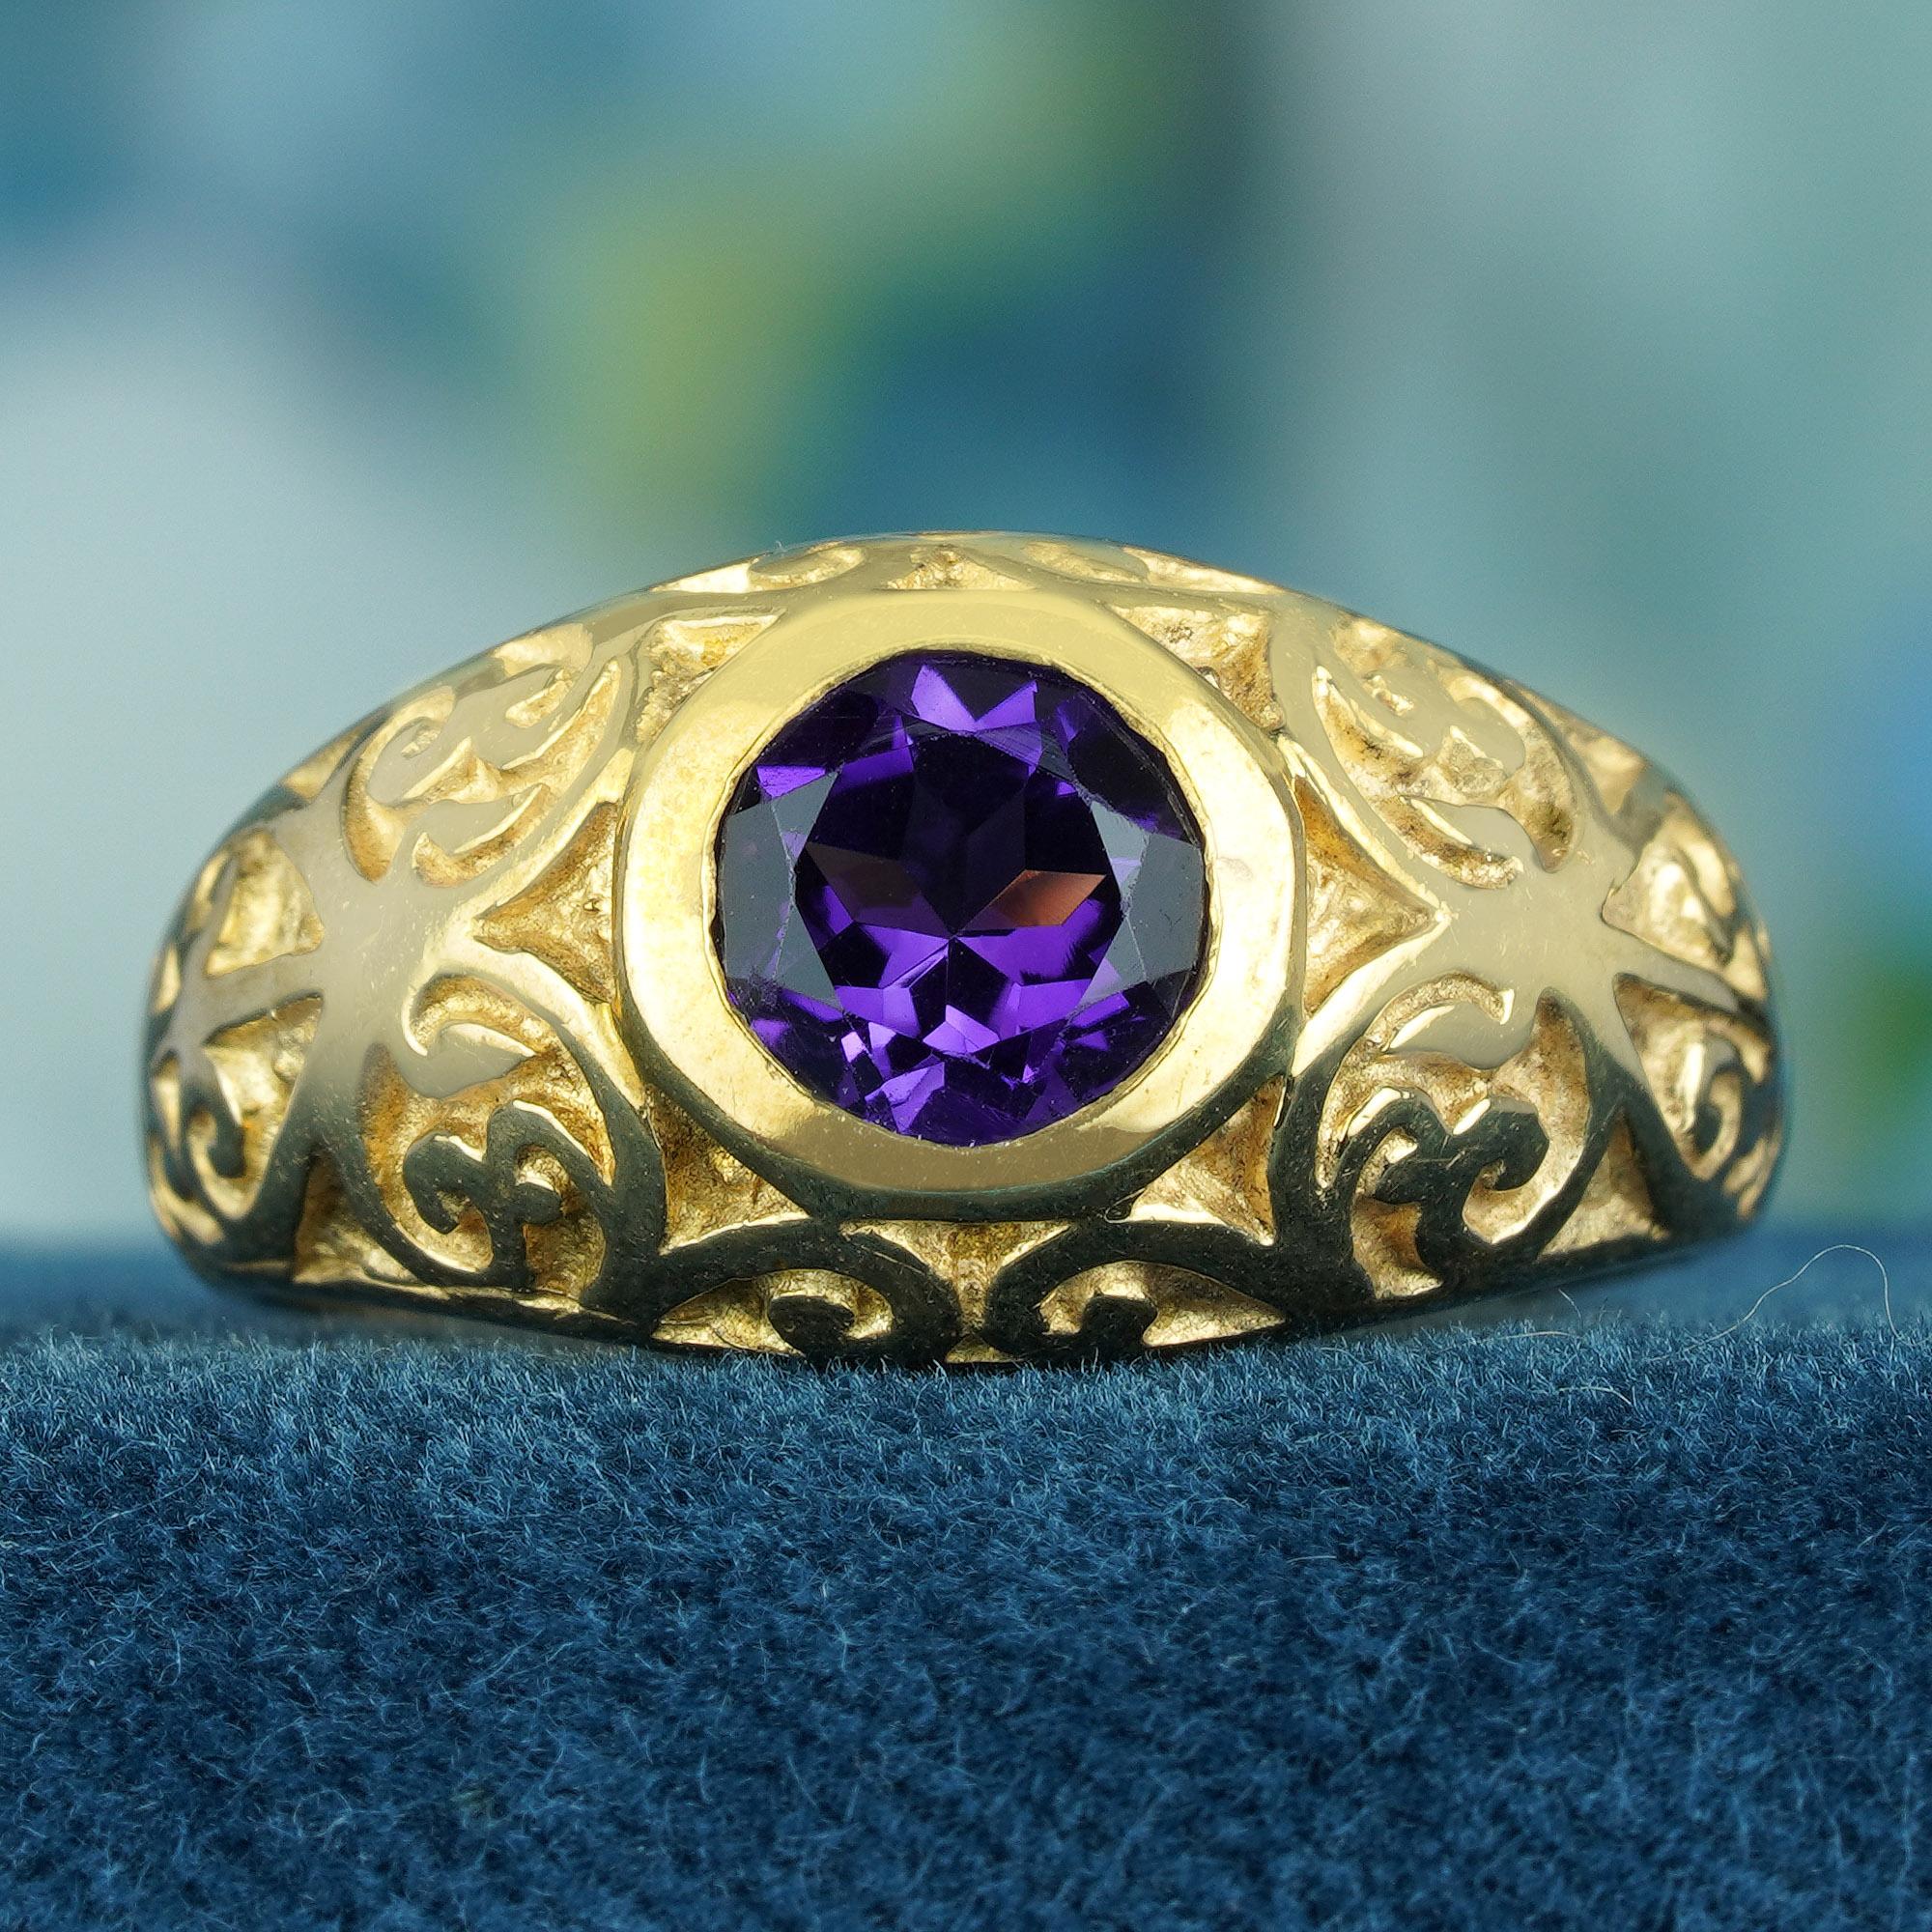 The rich and warm glow emanating from the intricately carved golden band beautifully complements the captivating purple amethyst gemstone. Its facets catch the light, sending mesmerizing shimmers across the room. Owning this ring is not merely about